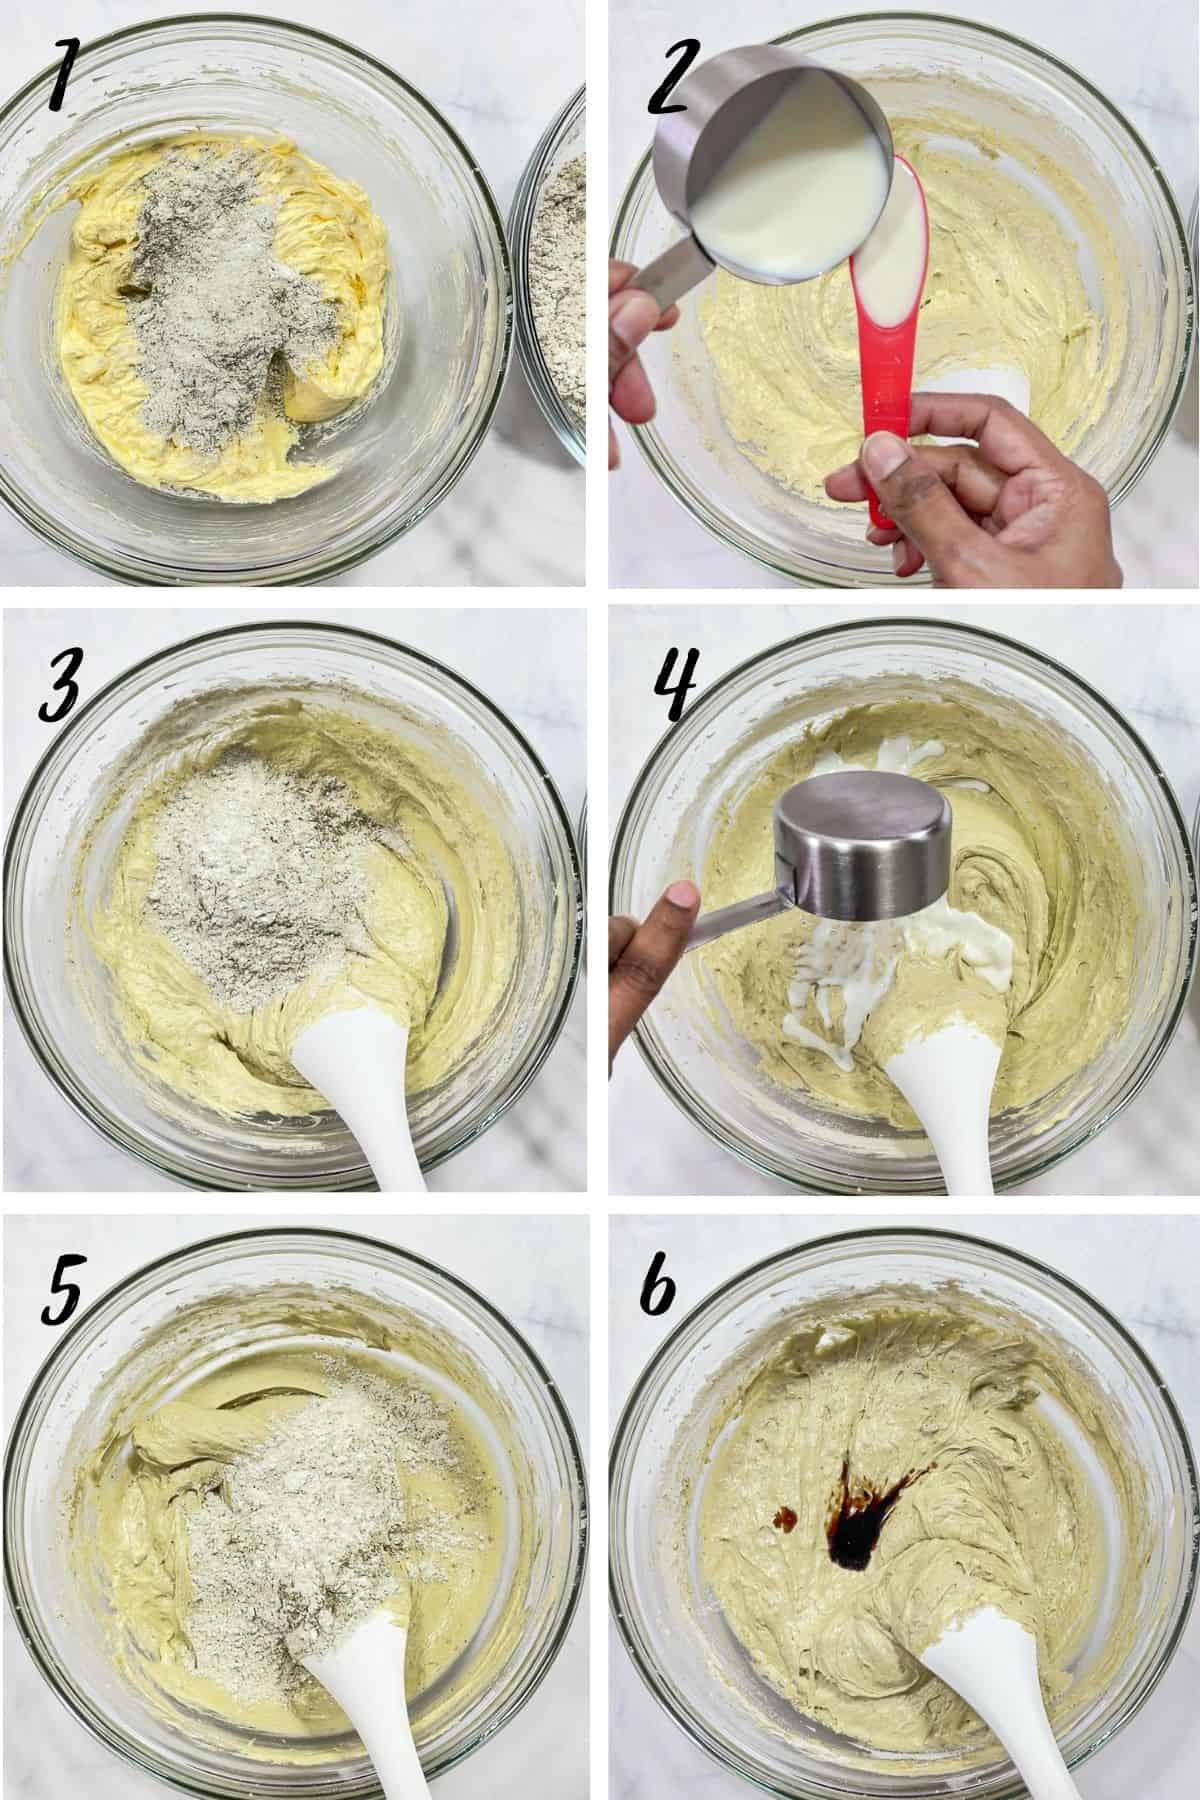 A poster of 6 images showing how to fold flour and milk into cake batter